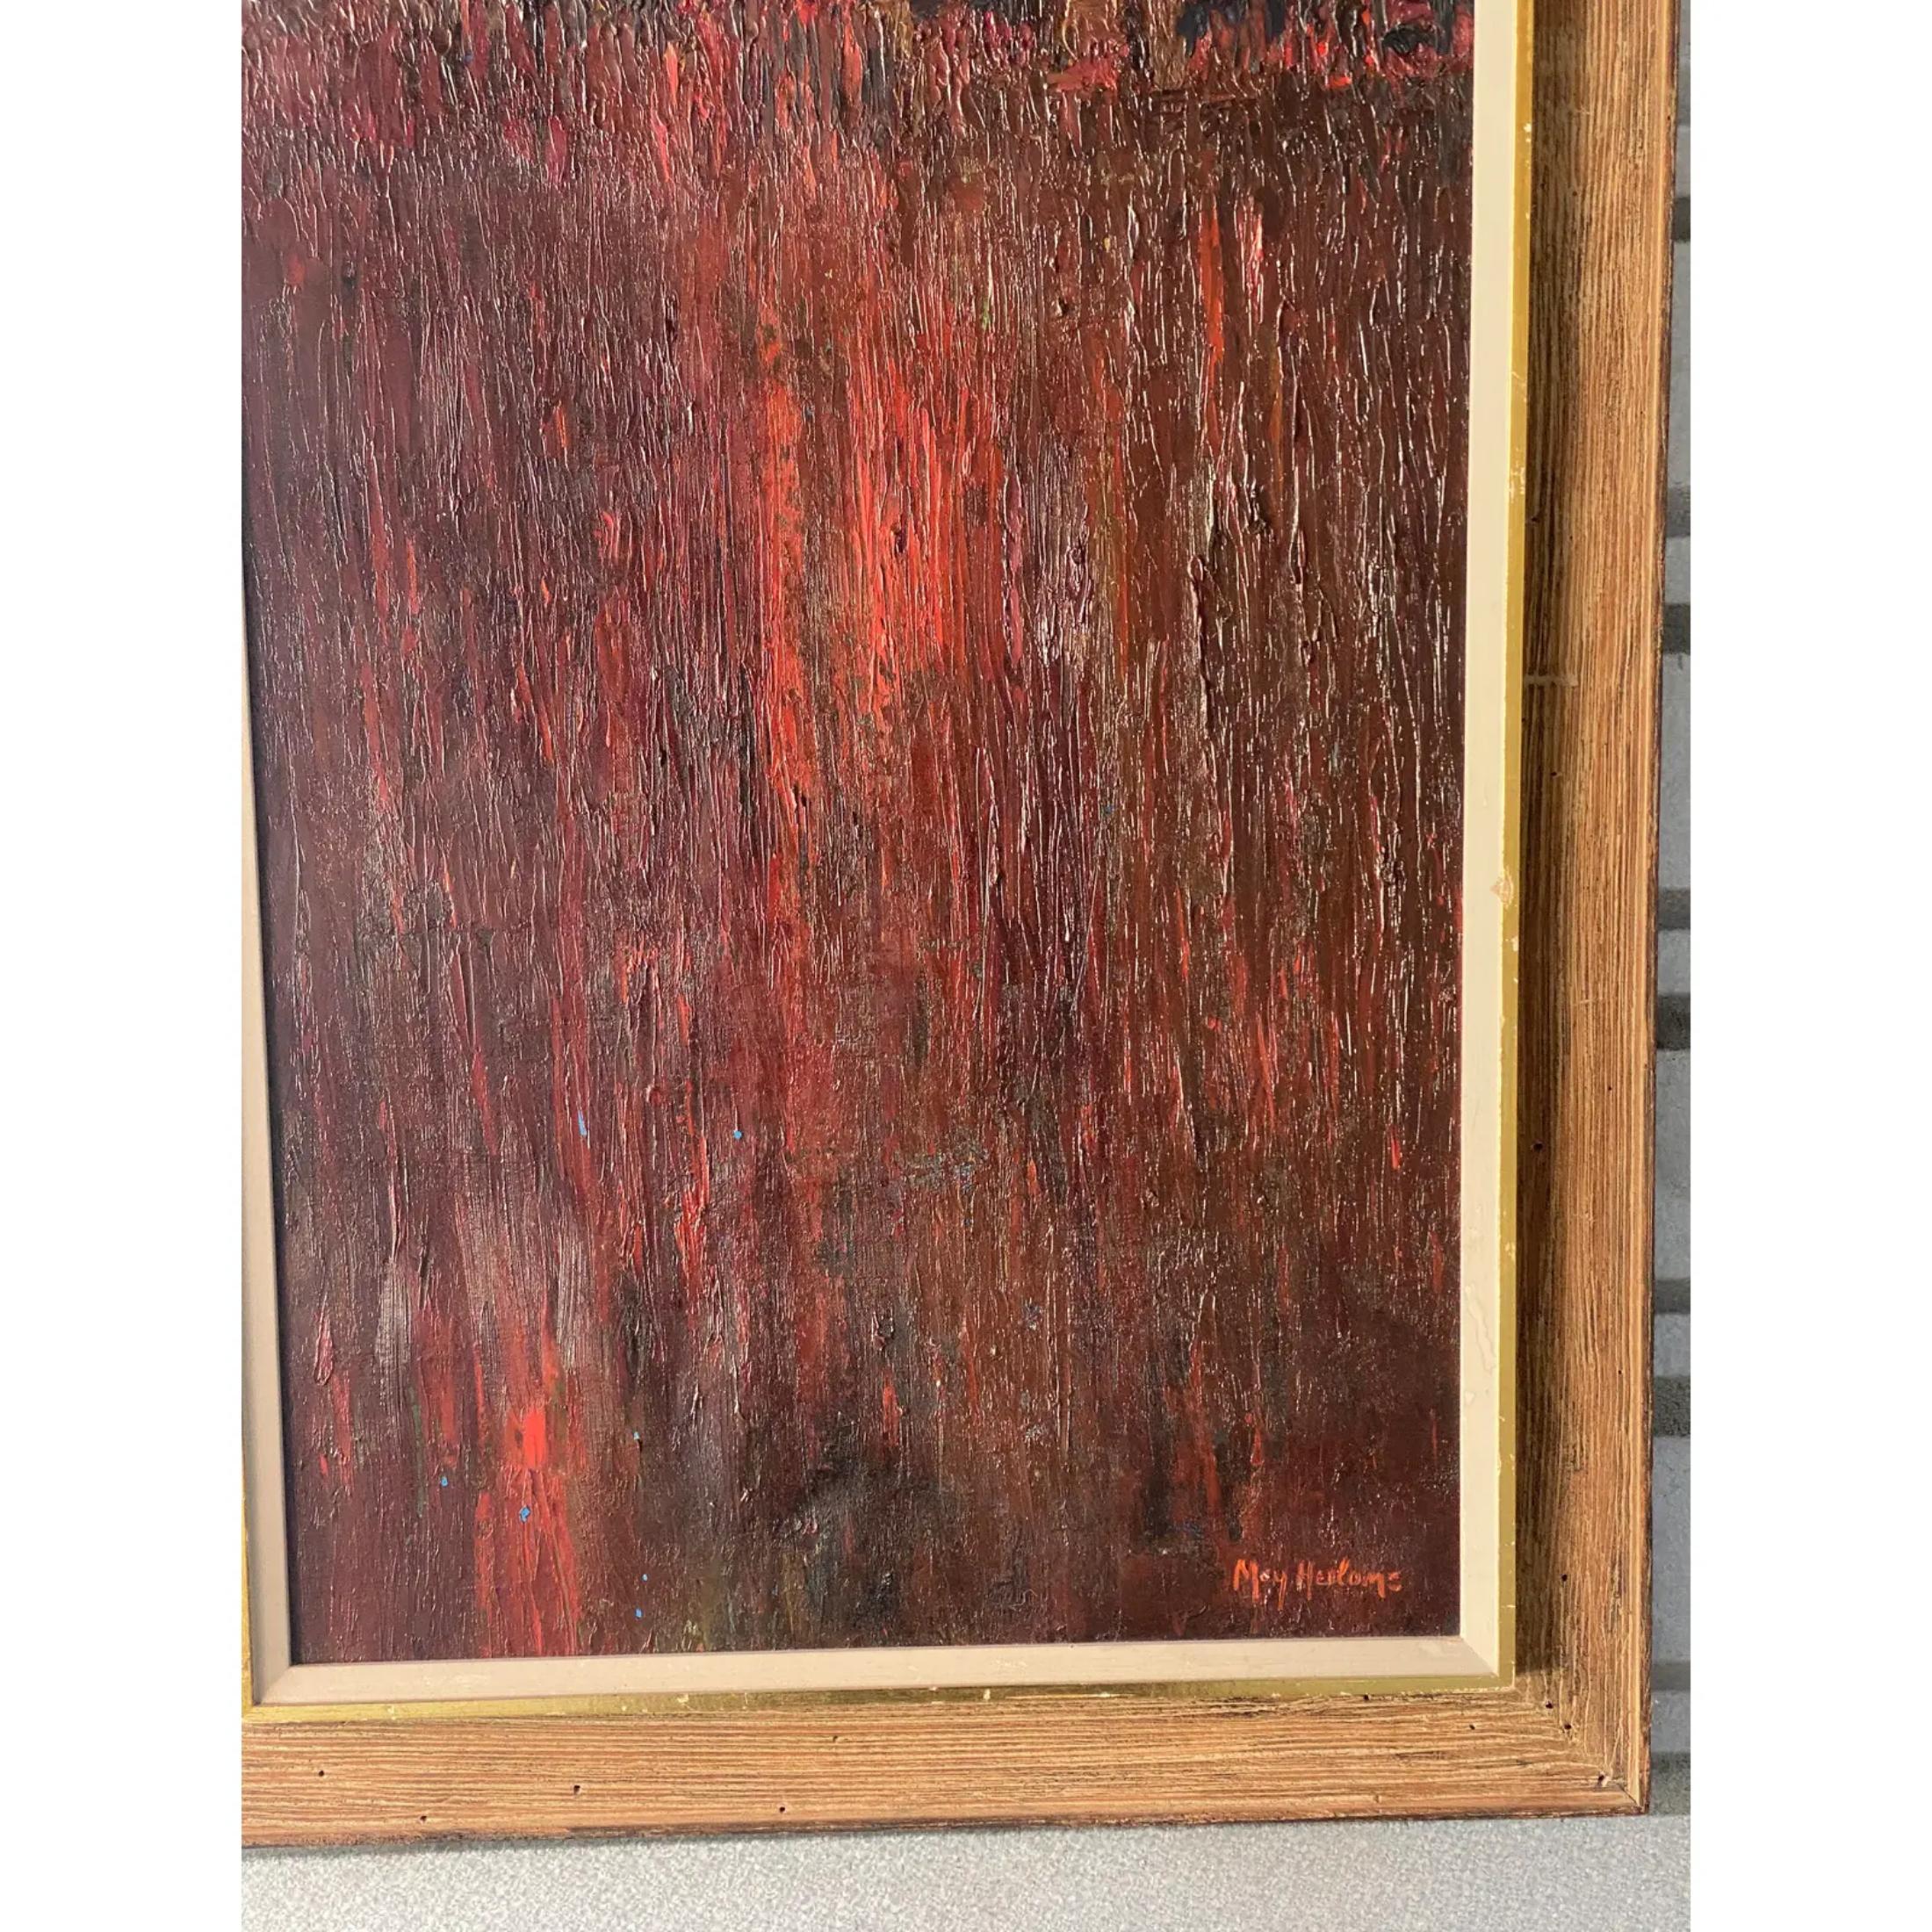 20th Century Midcentury Abstract Original Oil Painting Signed May Heiloms For Sale